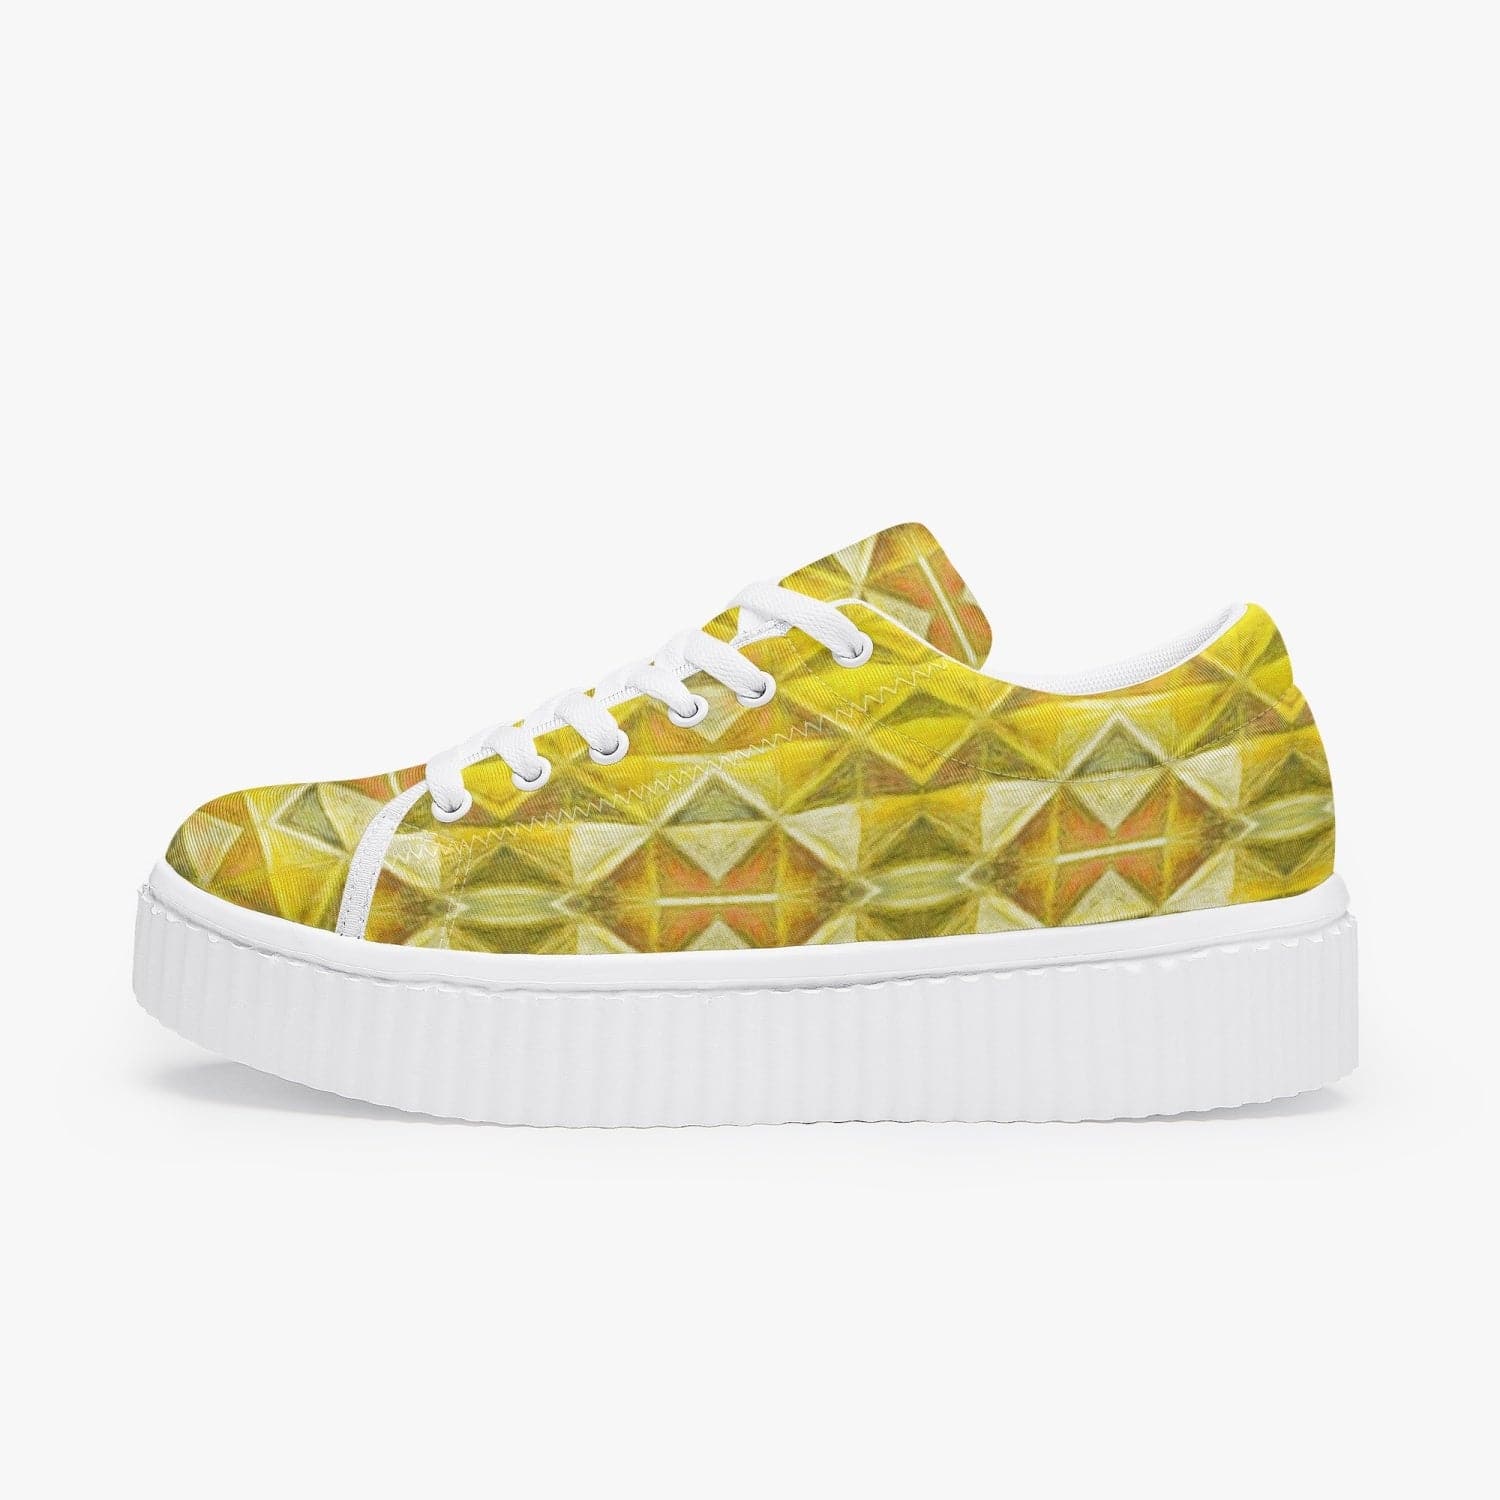 Connecting the True Purpose of Being Yellow Beautiful Patterned Women’s Low Top Platform Sneakers,by Sensus Studio Design